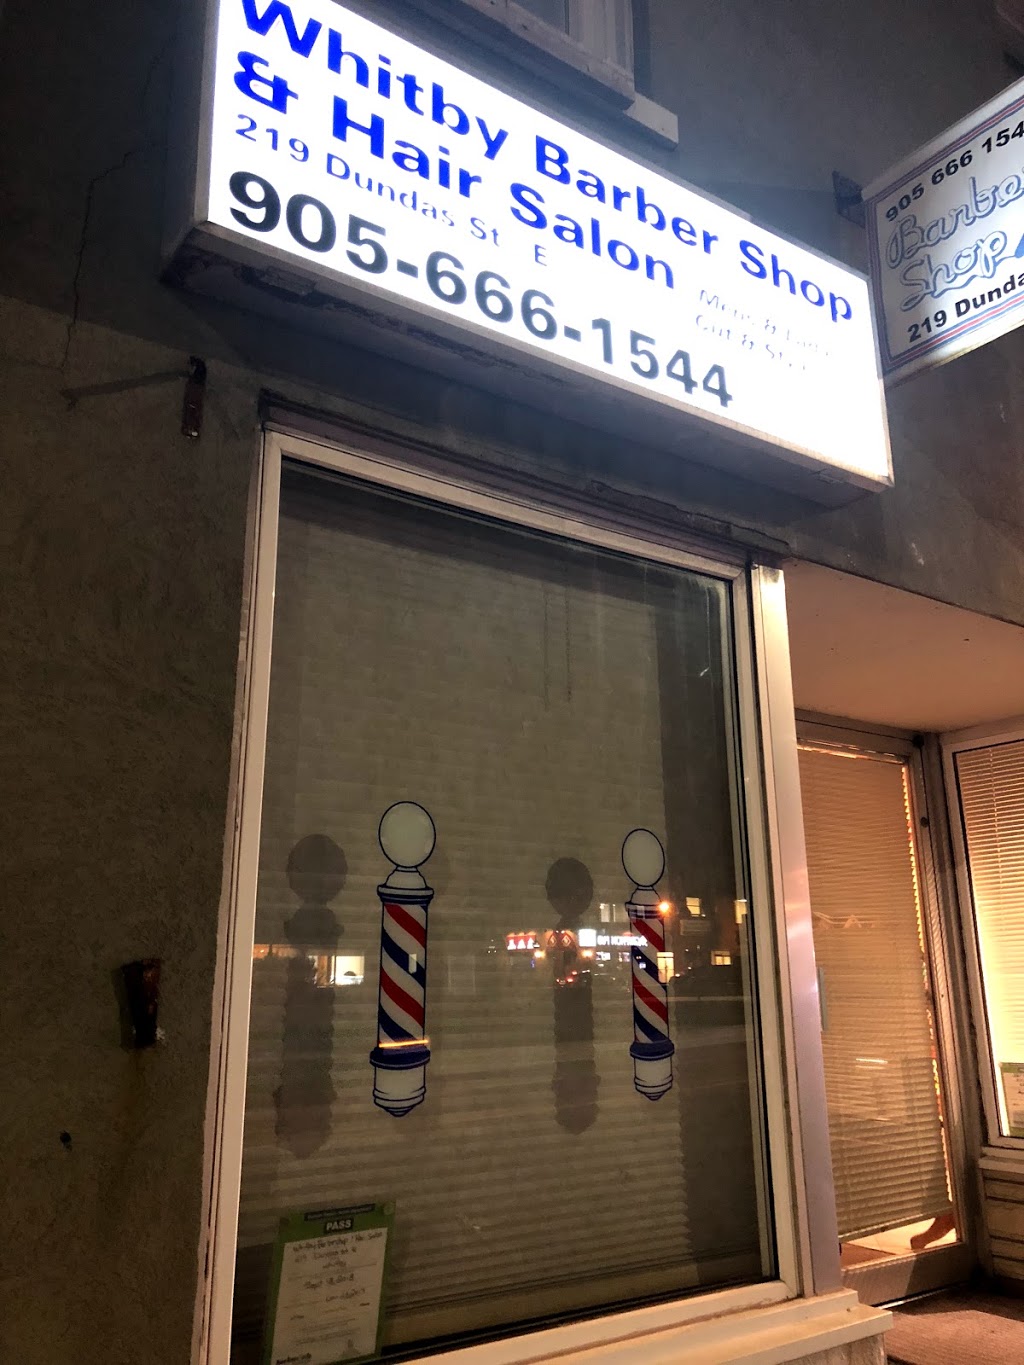 Whitby Barber Shop | 219 Dundas St E, Whitby, ON L1N 2H9, Canada | Phone: (905) 666-1544